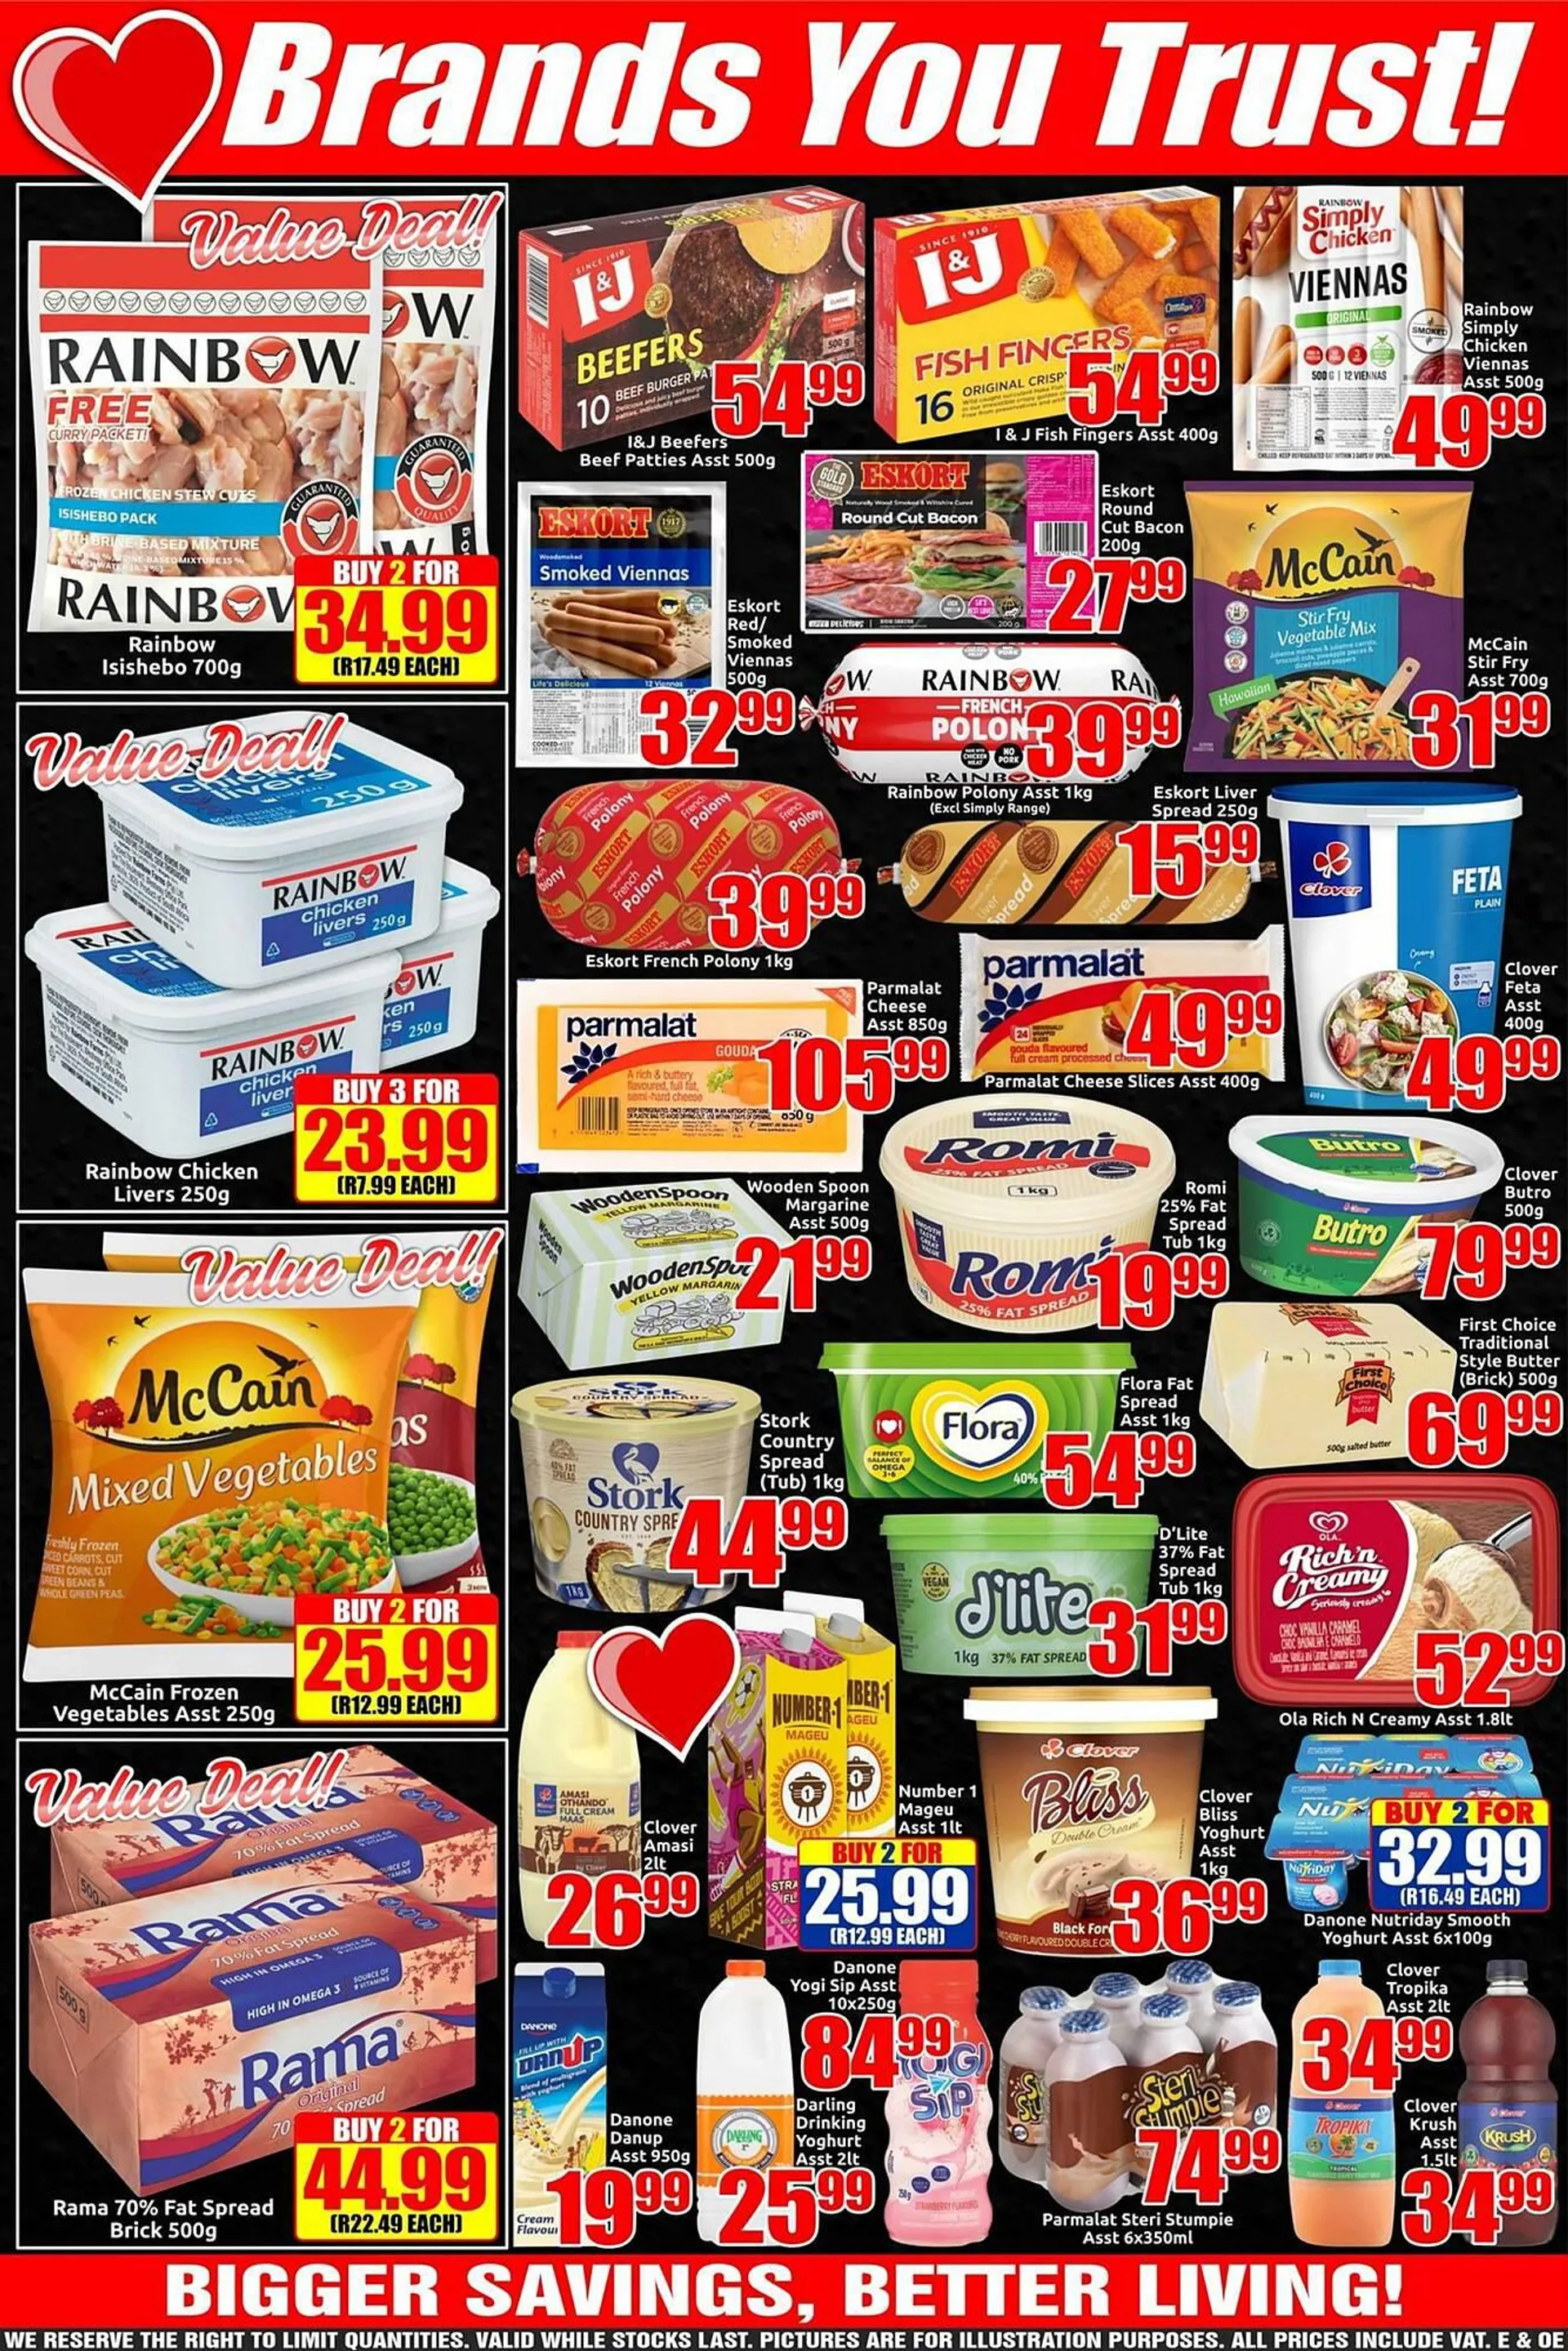 Three Star Cash and Carry catalogue - 3